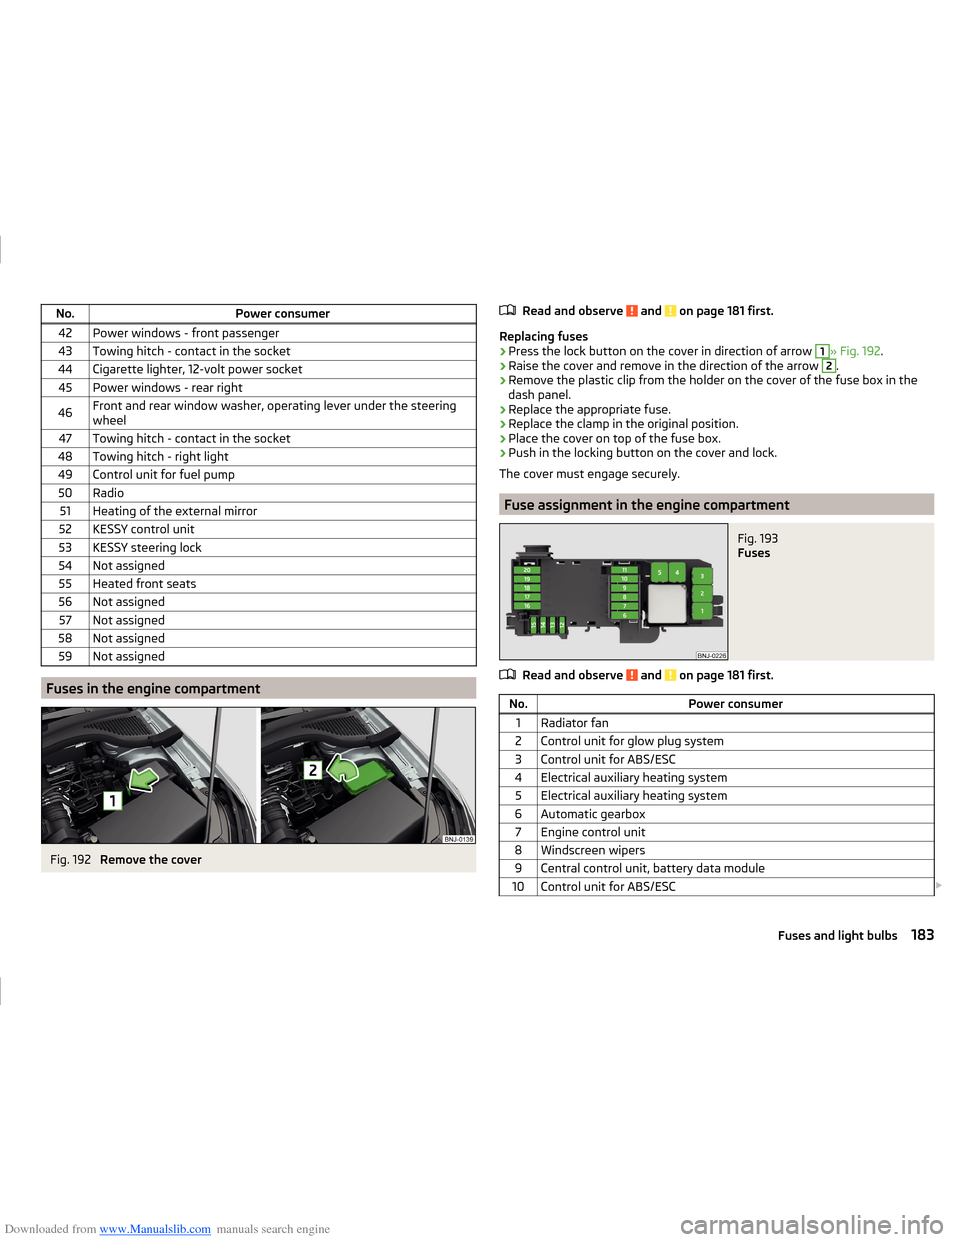 SKODA FABIA 2014 3.G / NJ Operating Instruction Manual Downloaded from www.Manualslib.com manuals search engine No.Power consumer42Power windows - front passenger43Towing hitch - contact in the socket44Cigarette lighter, 12-volt power socket45Power window